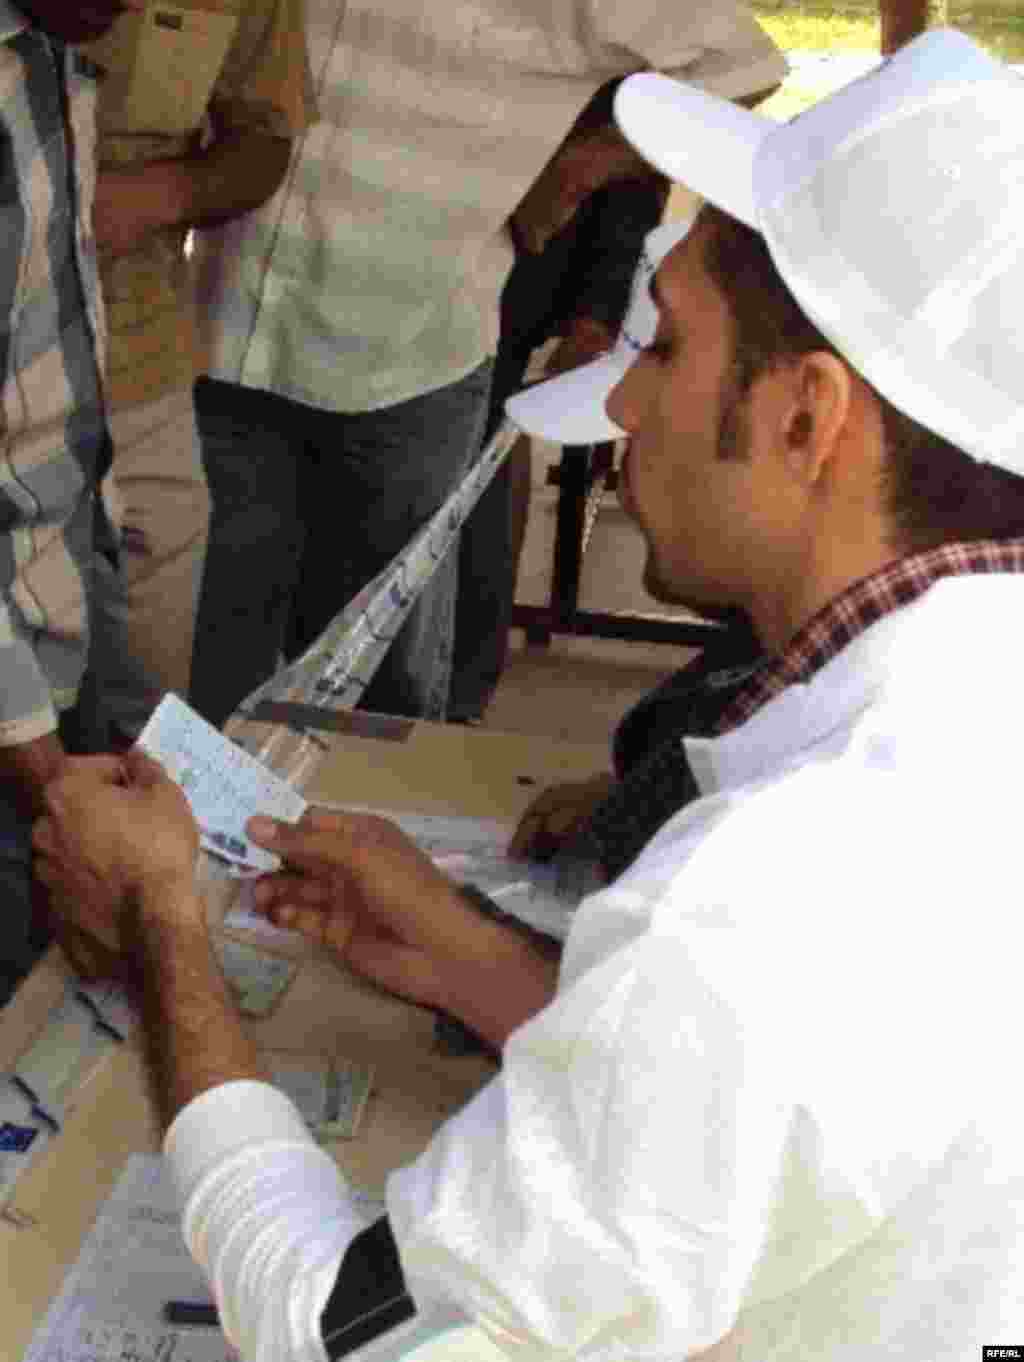 Election staff in Baghdad check the name of a voter against the official registry. (Photo: Radio Free Iraq)